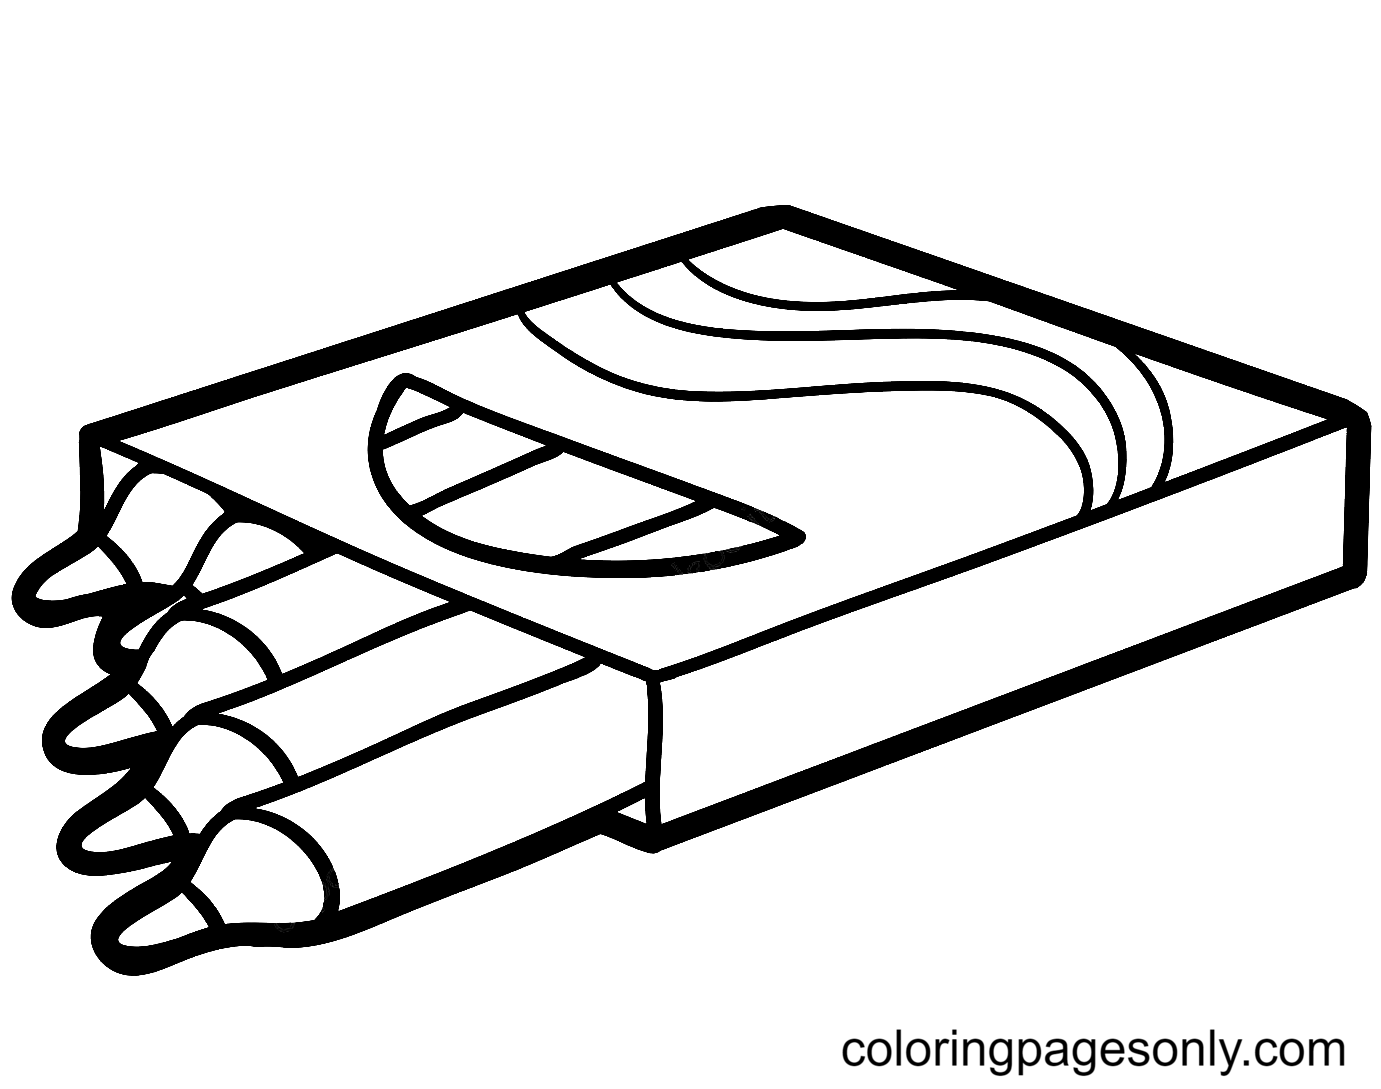 Crayons Box for Children Coloring Page